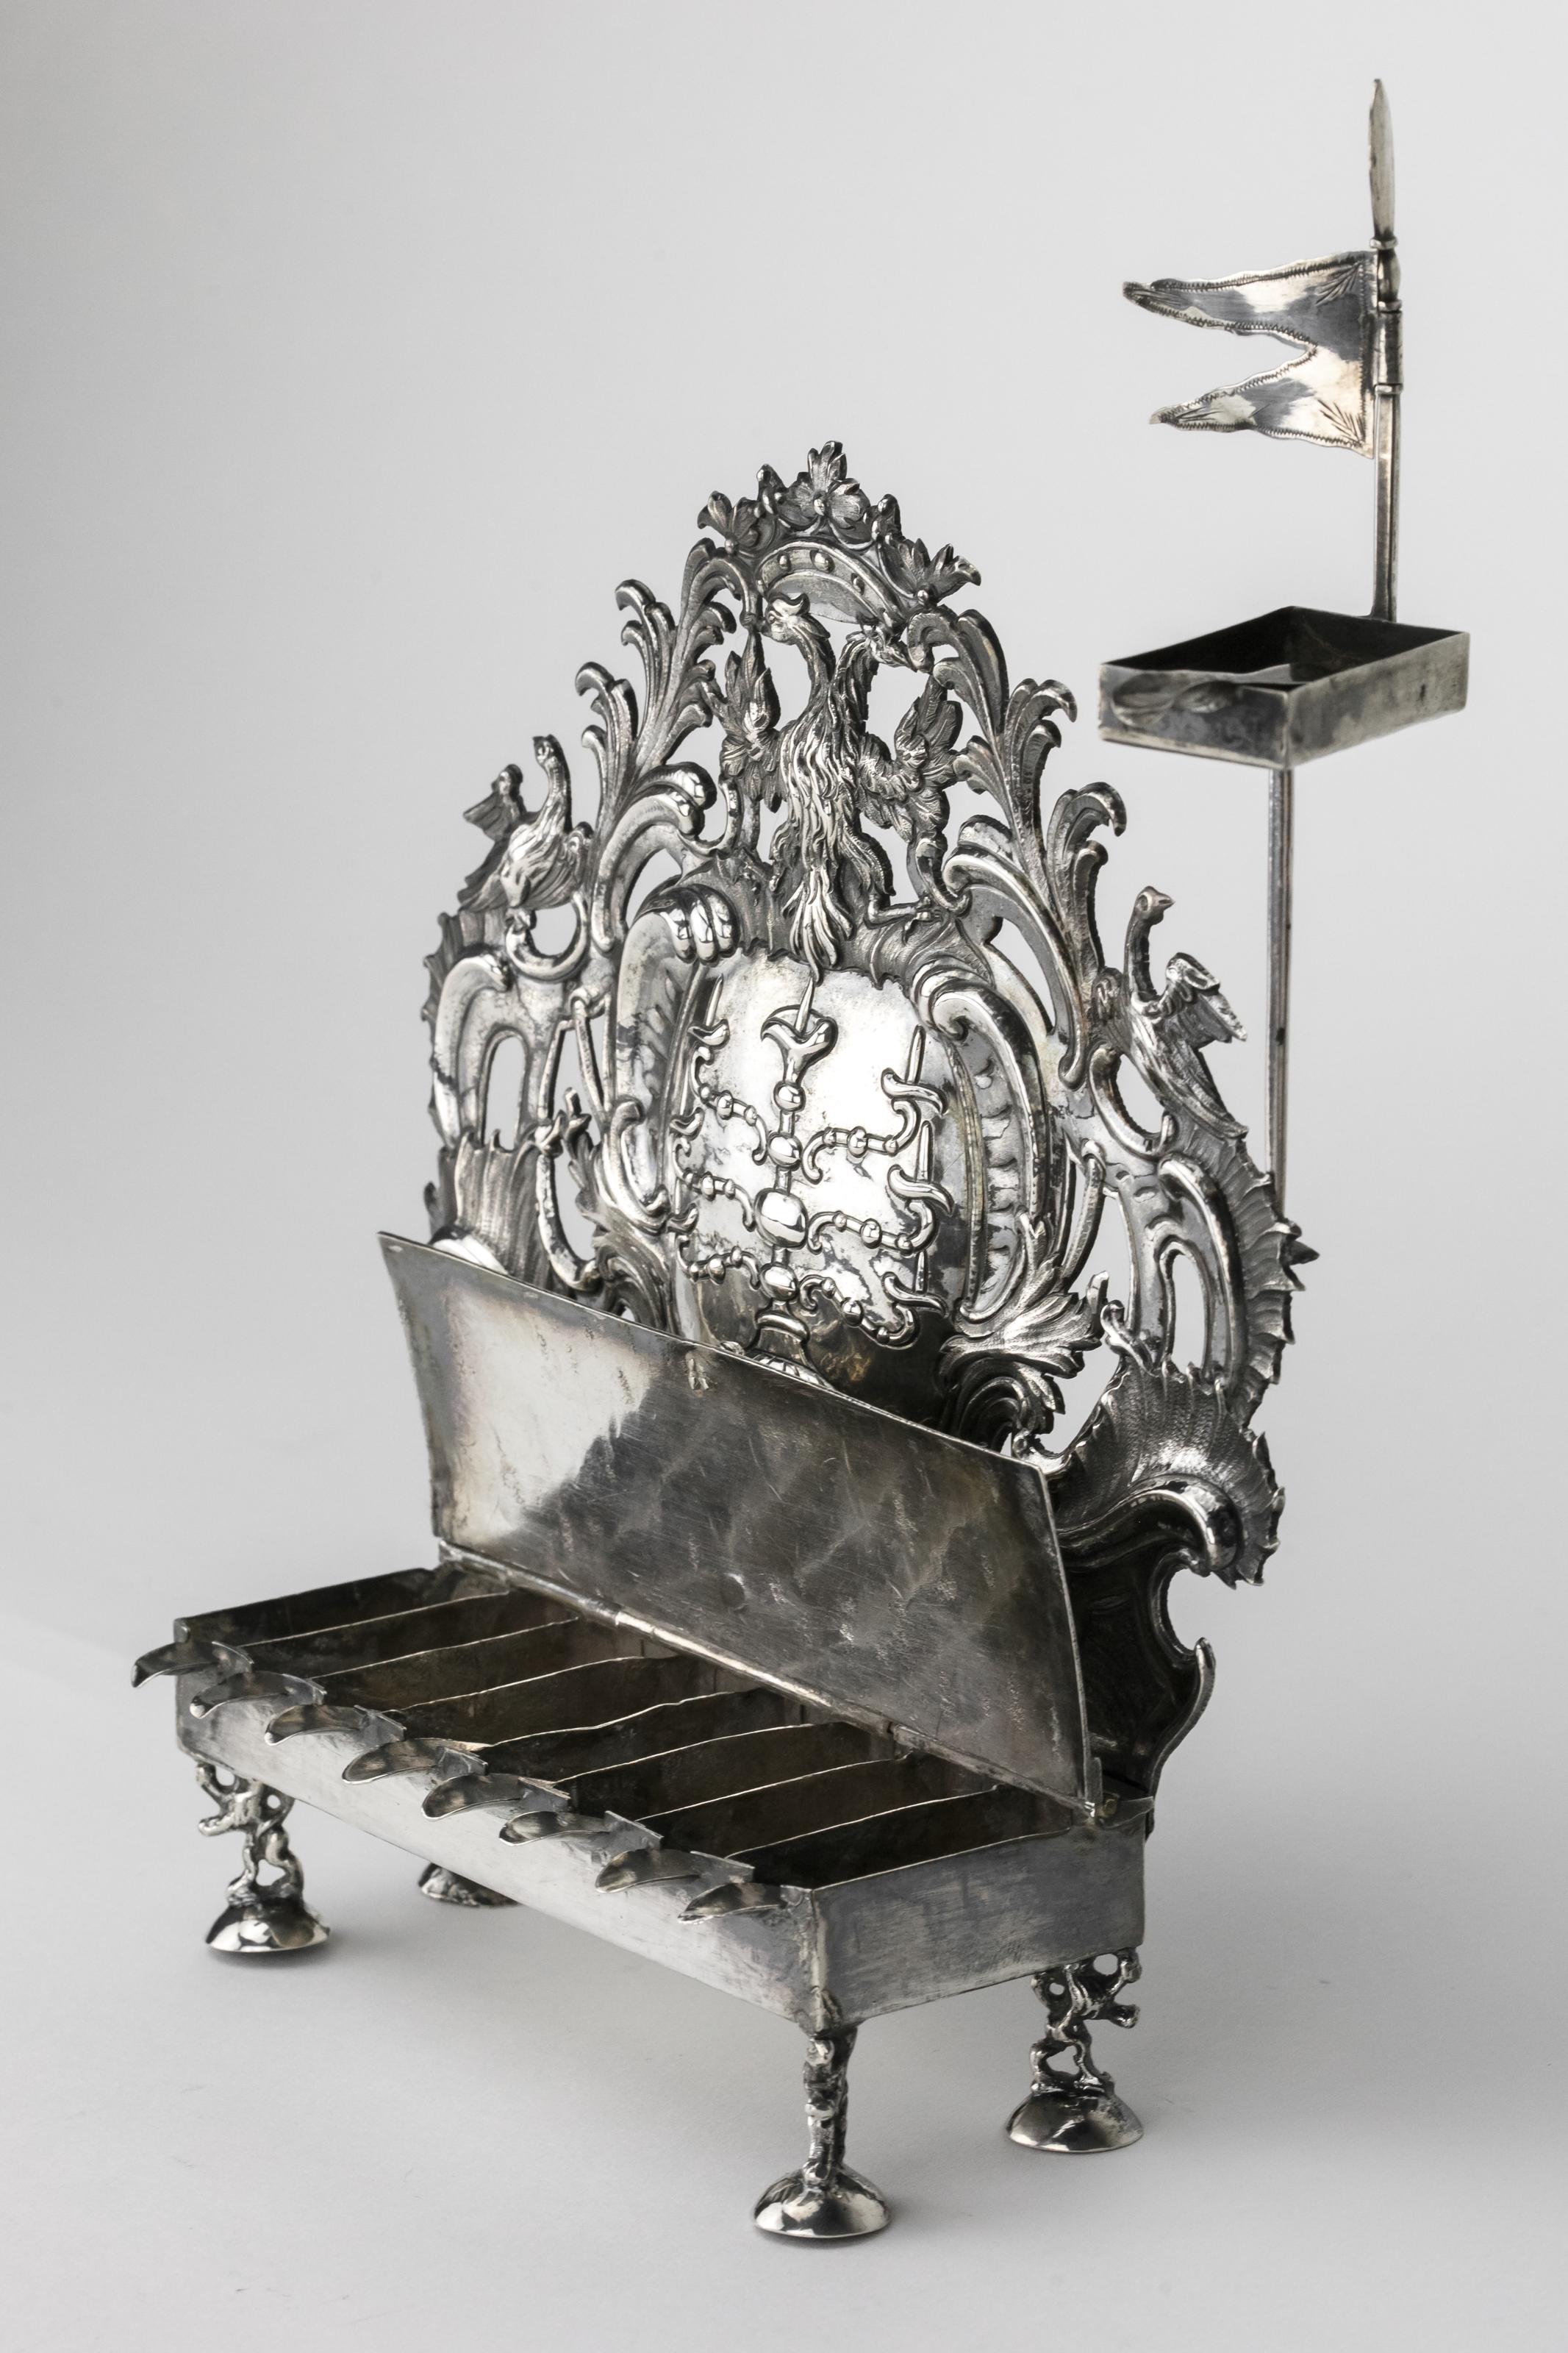 Decorated with Rococo cartouche enclosing a Menorah, the center tooled in a checker pattern by crowned double-headed eagle, supported by four rampant lions, has servant light.
Made in Frankfurt, Germany, between 1748-76, marked on backplate and